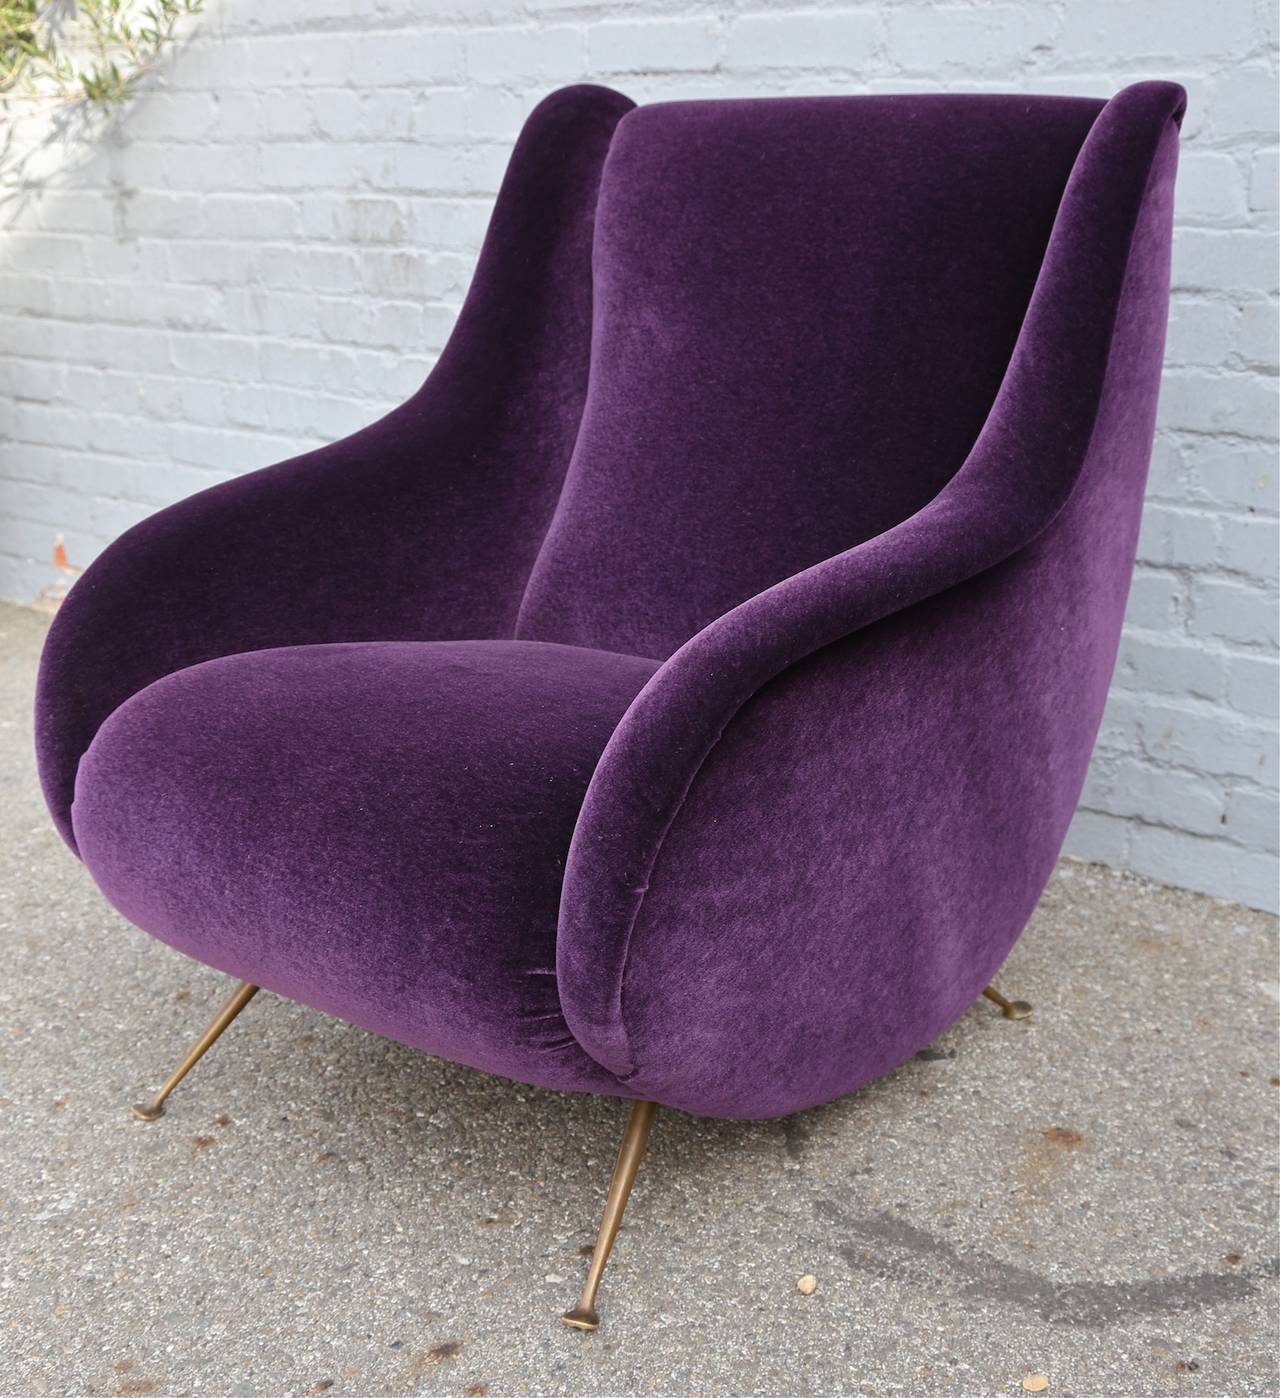 Italian armchair from the 1960s upholstered in purple/aubergine mohair with brass legs.